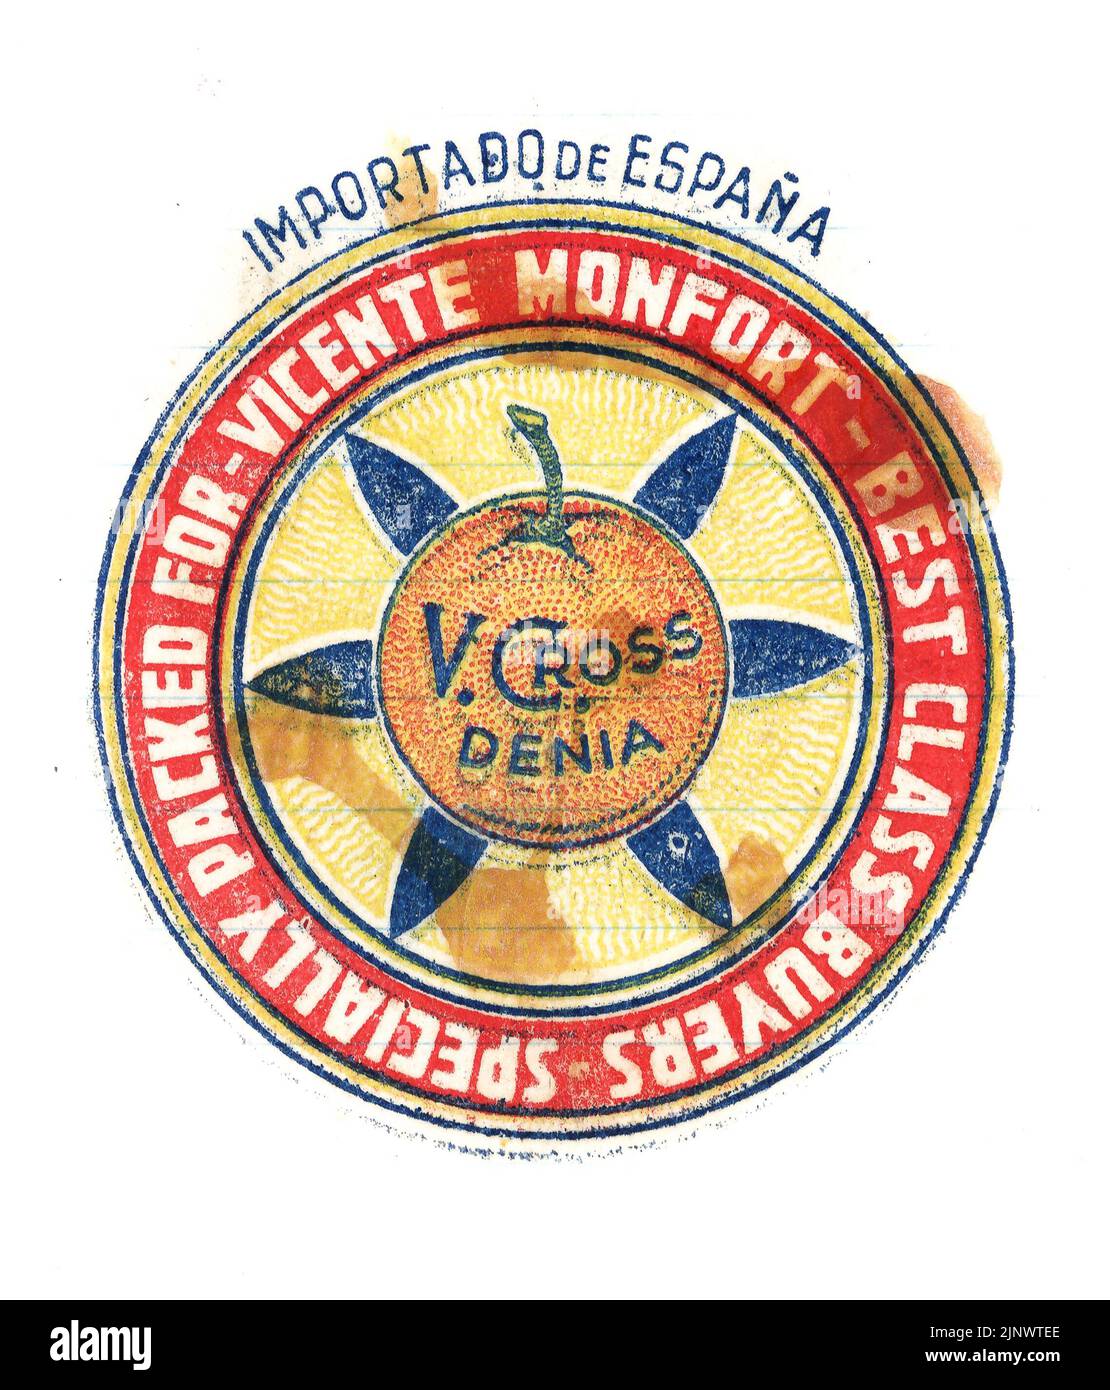 Fresh fruit tissue paper wrapper, from mid-1950s England, with grower's trade mark. Vicente Monfort, V. Cross, Denia. Spanish, picture of orange. Stock Photo